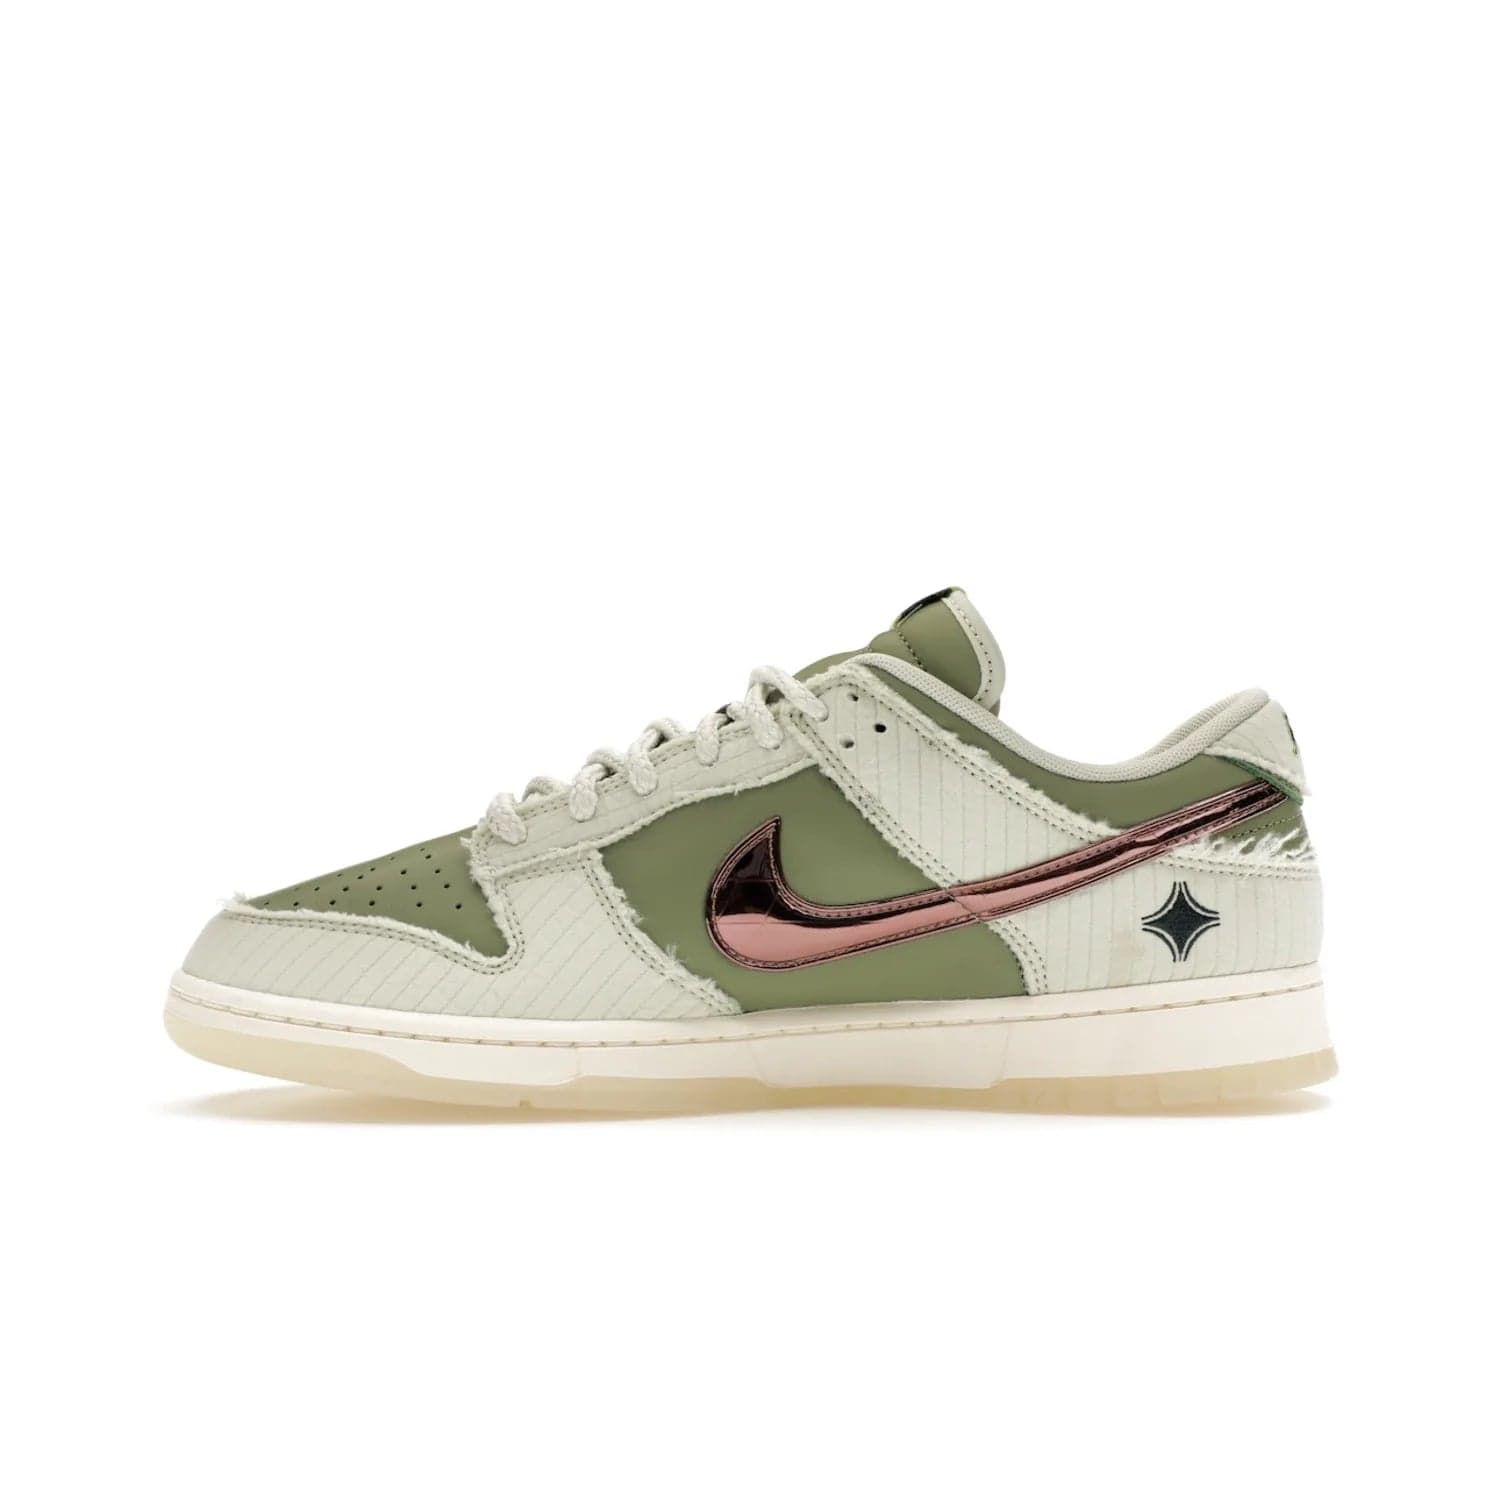 Nike Dunk Low Retro PRM Kyler Murray Be 1 of One - Image 19 - Only at www.BallersClubKickz.com - Introducing the Nike Dunk Low Retro PRM Kyler Murray "Be 1 of One"! A Sea Glass upper with Sail and Oil Green accents, finished with Rose Gold accents. Drop date: November 10th.